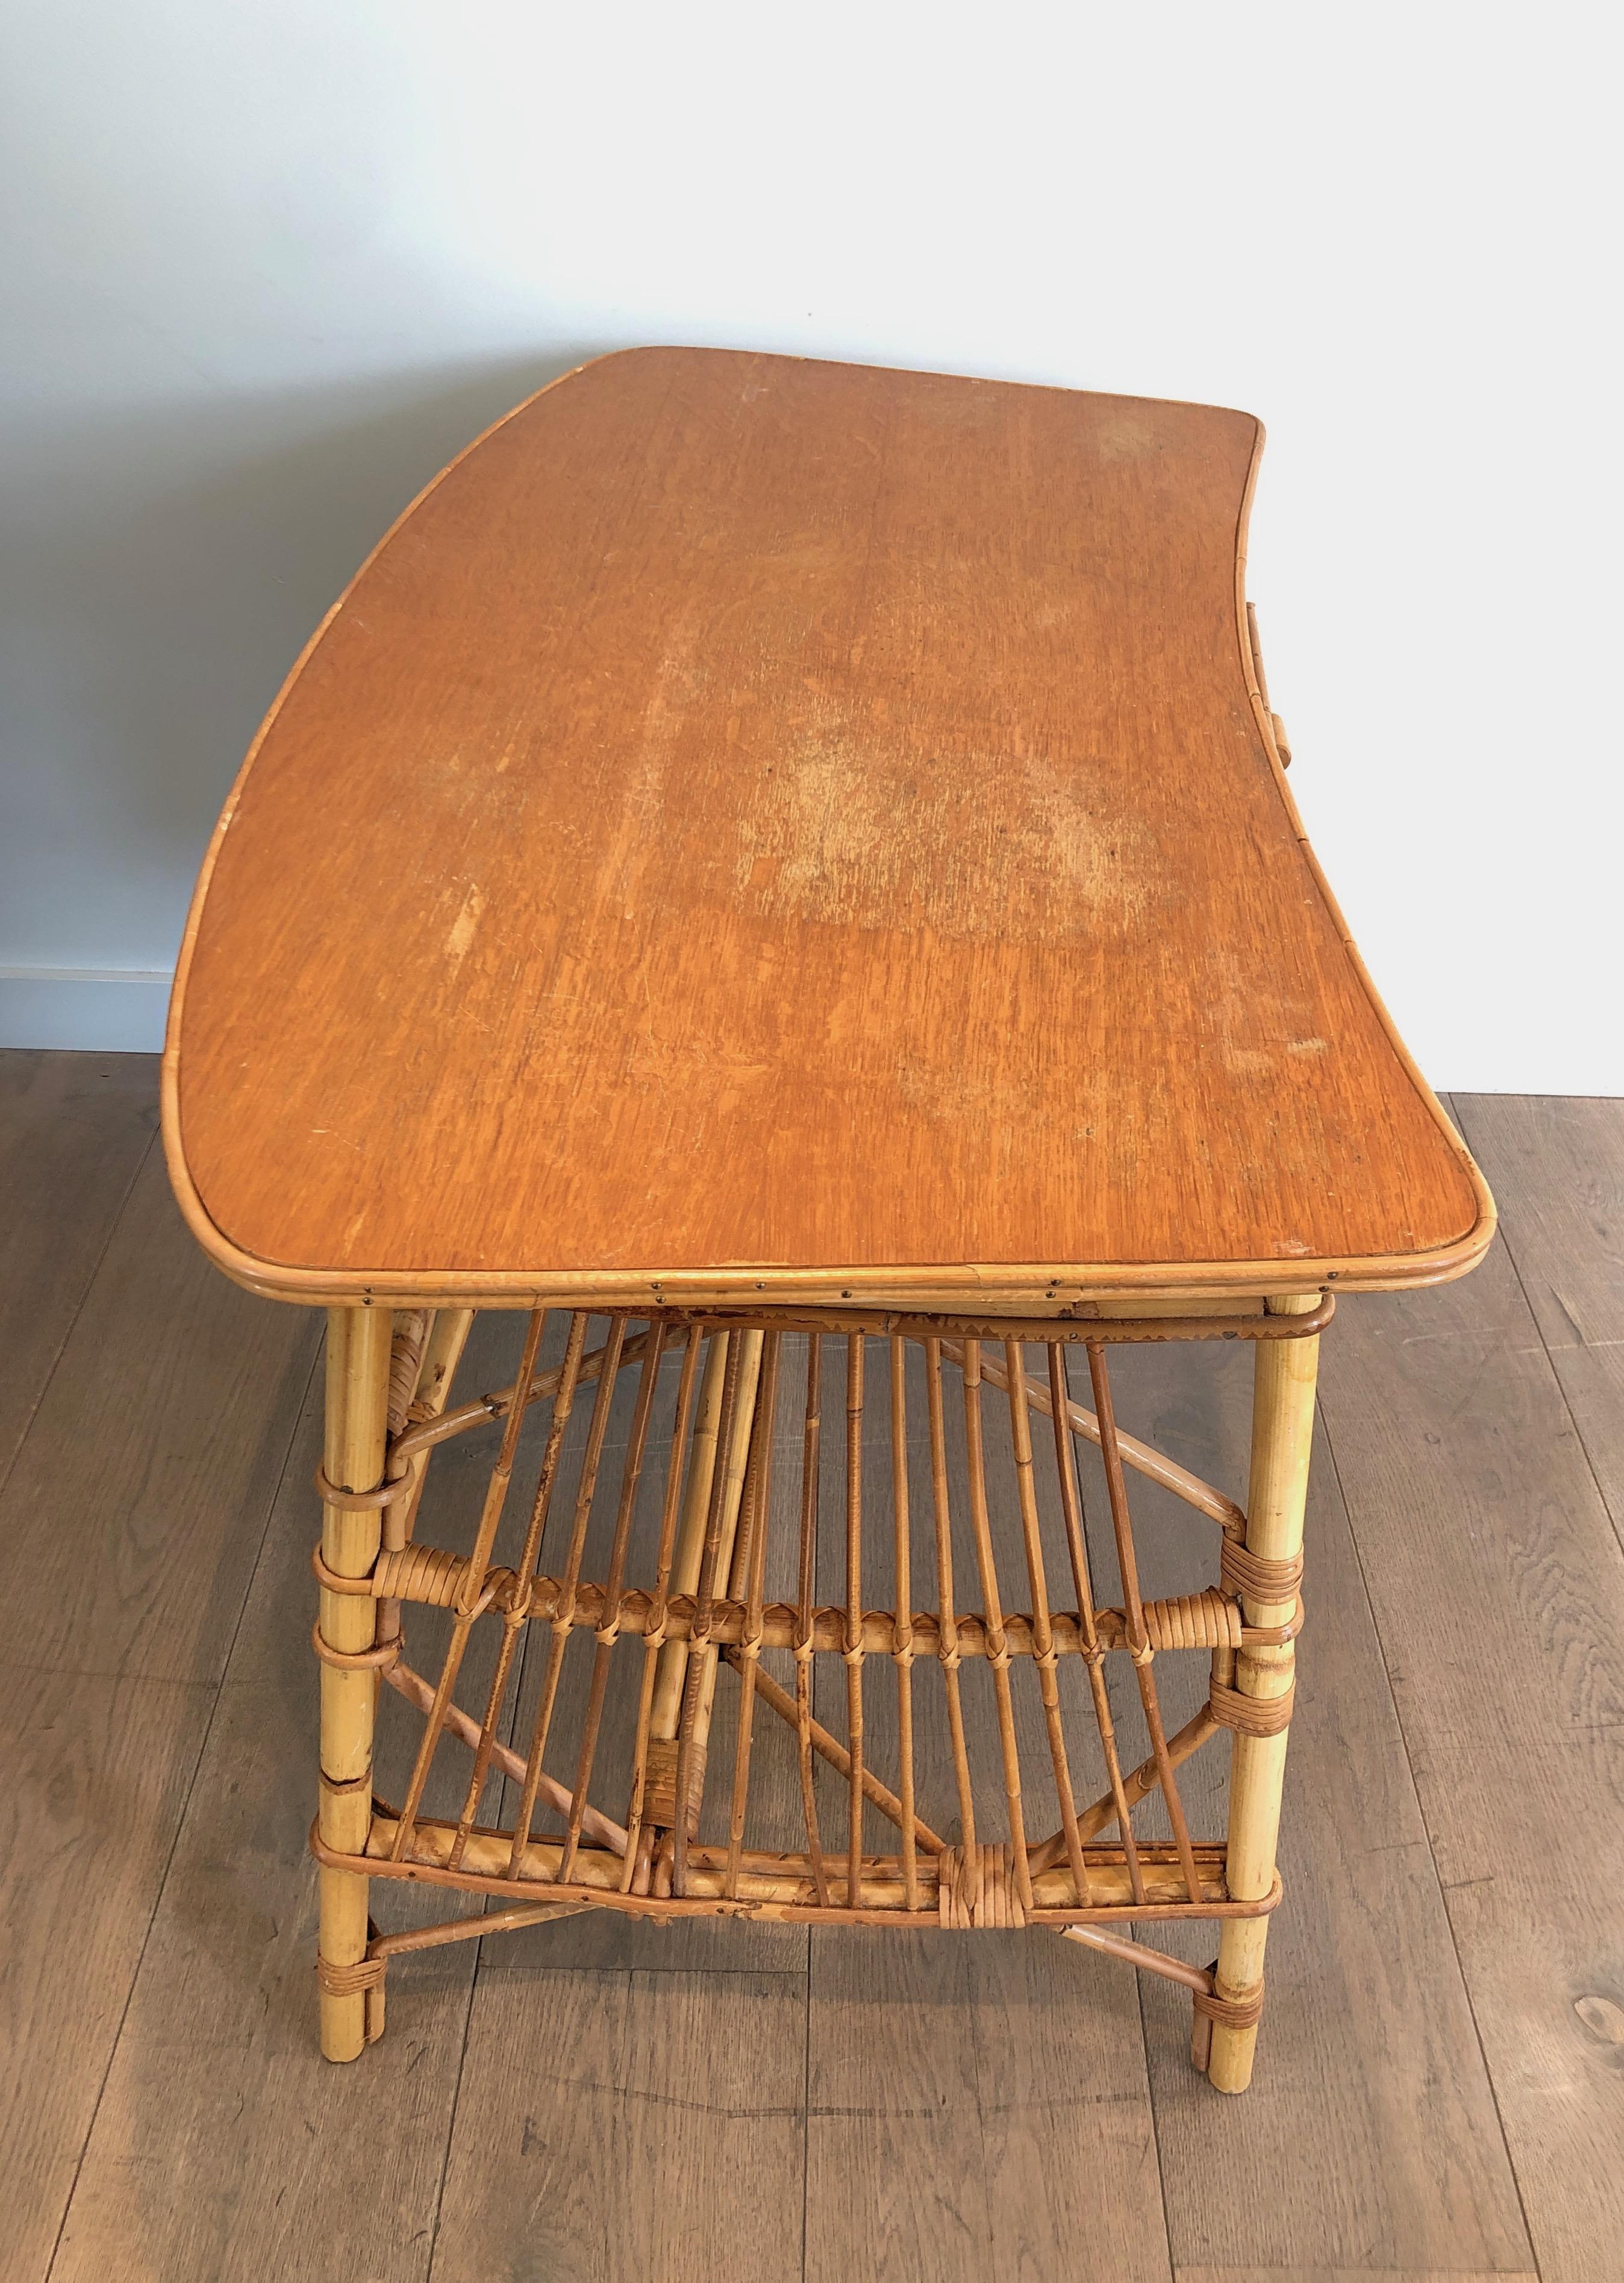 Attributed to Audoux Minet, Rattan Desk with Drawers, French, Circa 1970 For Sale 3